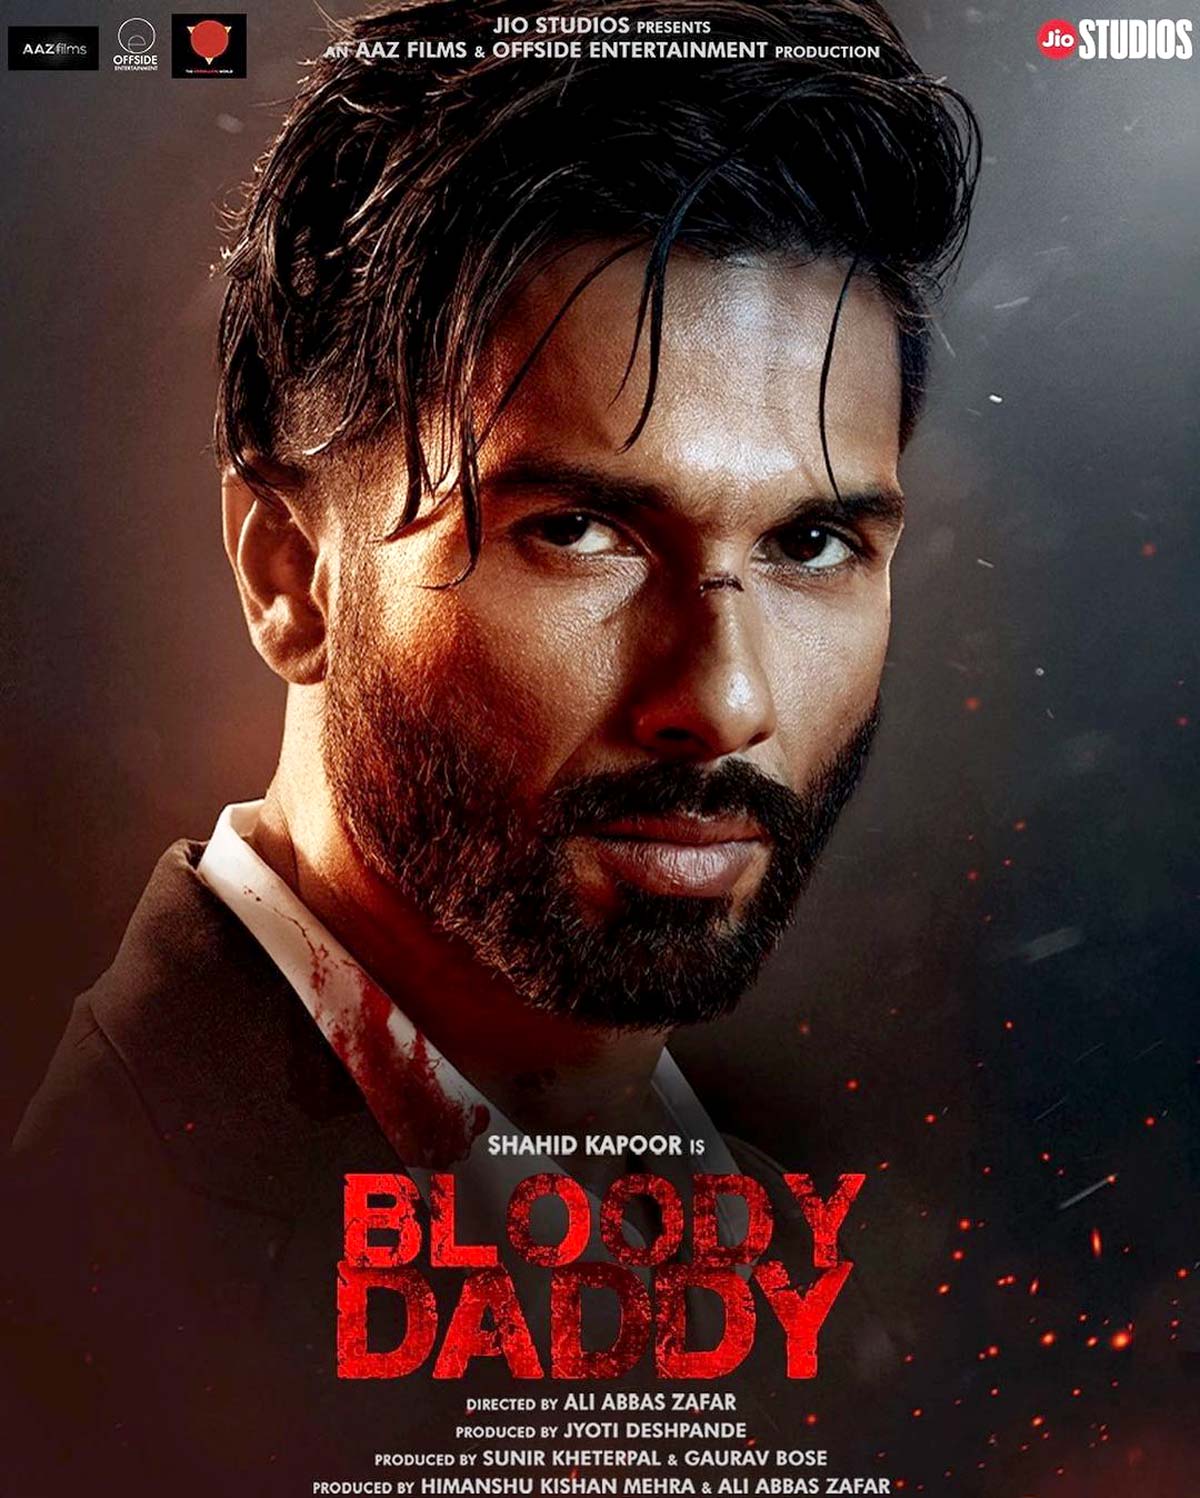 Shahid Is A Bloody Daddy!